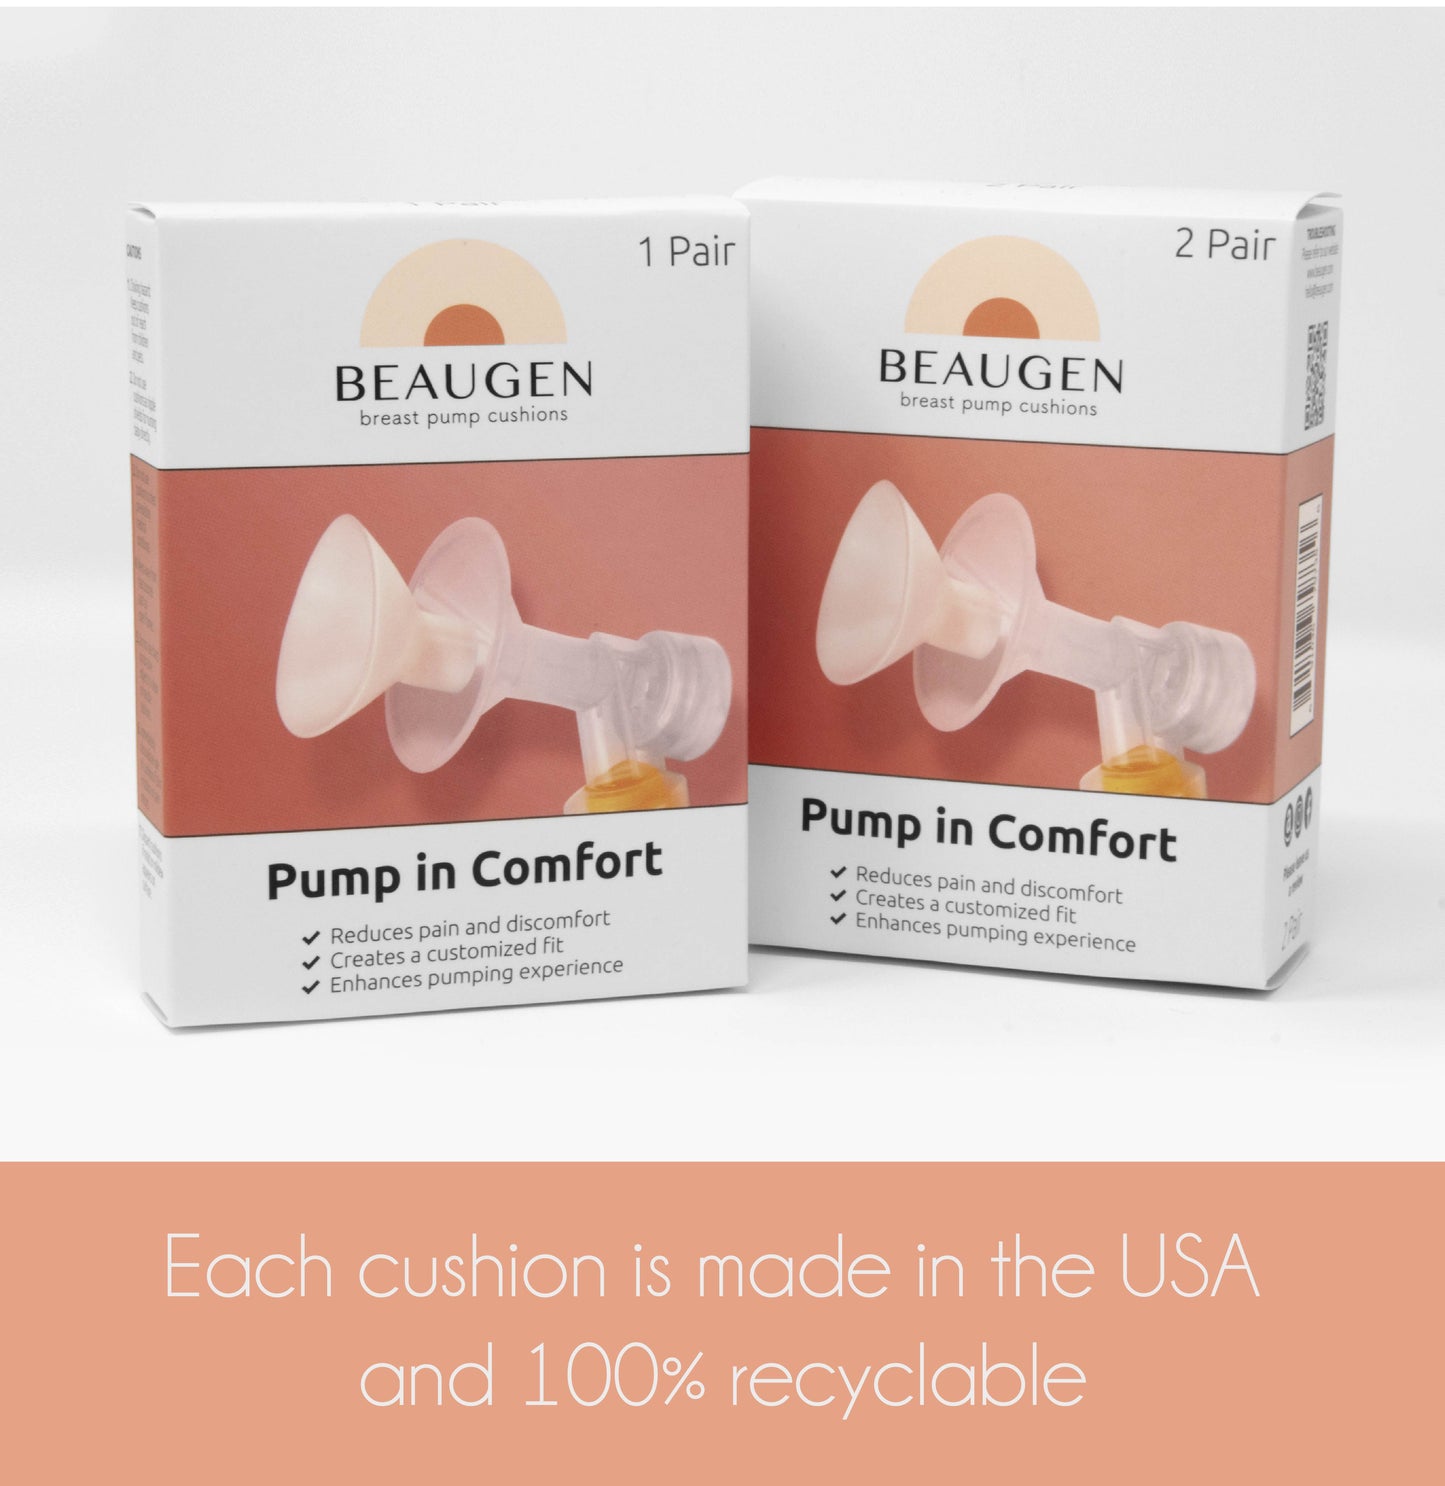 BeauGen breast pump cushions are made in the USA and 100% recyclable